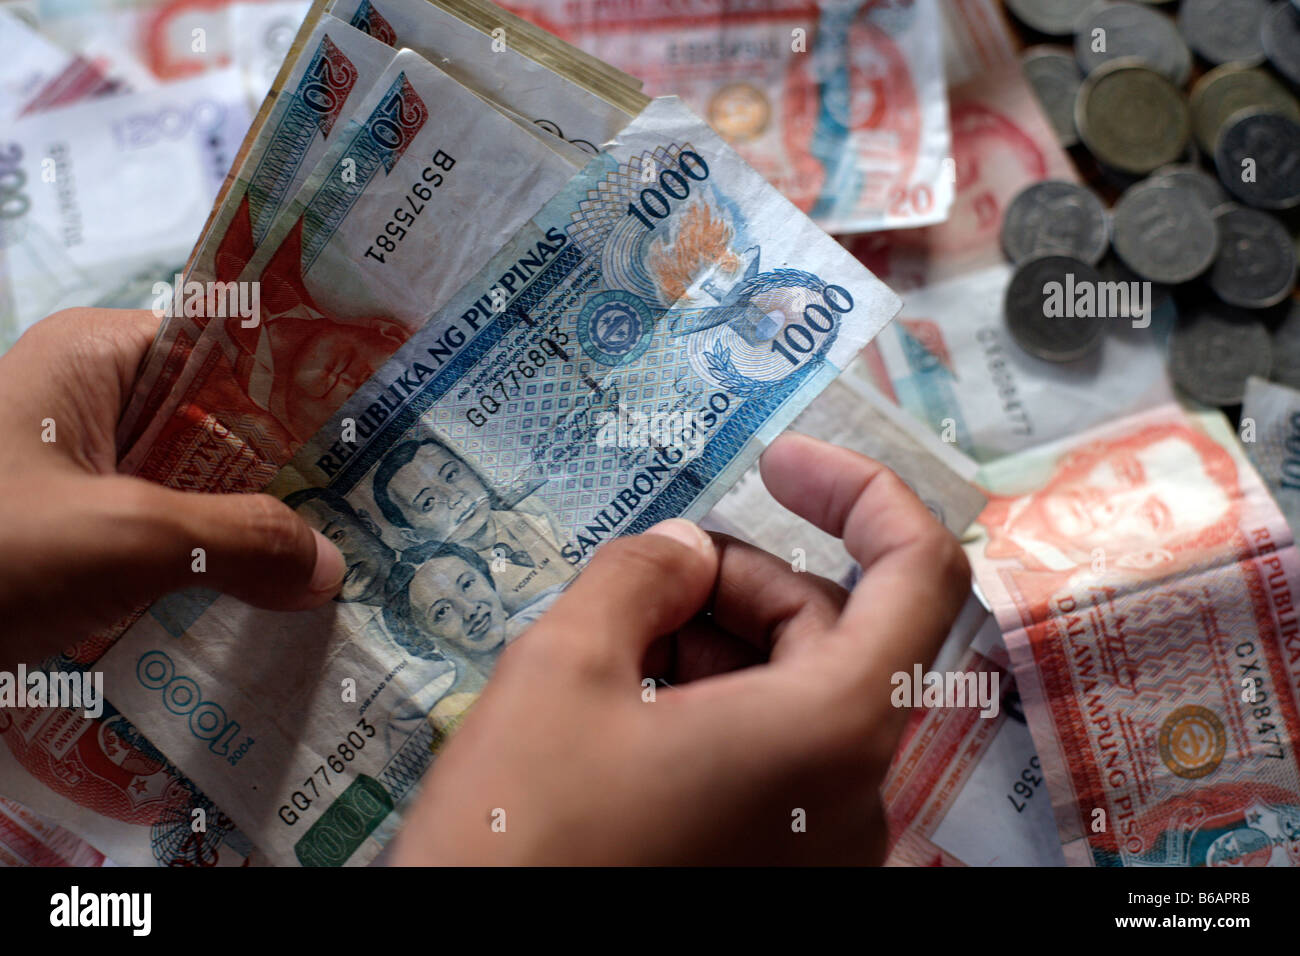 Philippine peso notes and coins are displayed in Manila Stock Photo